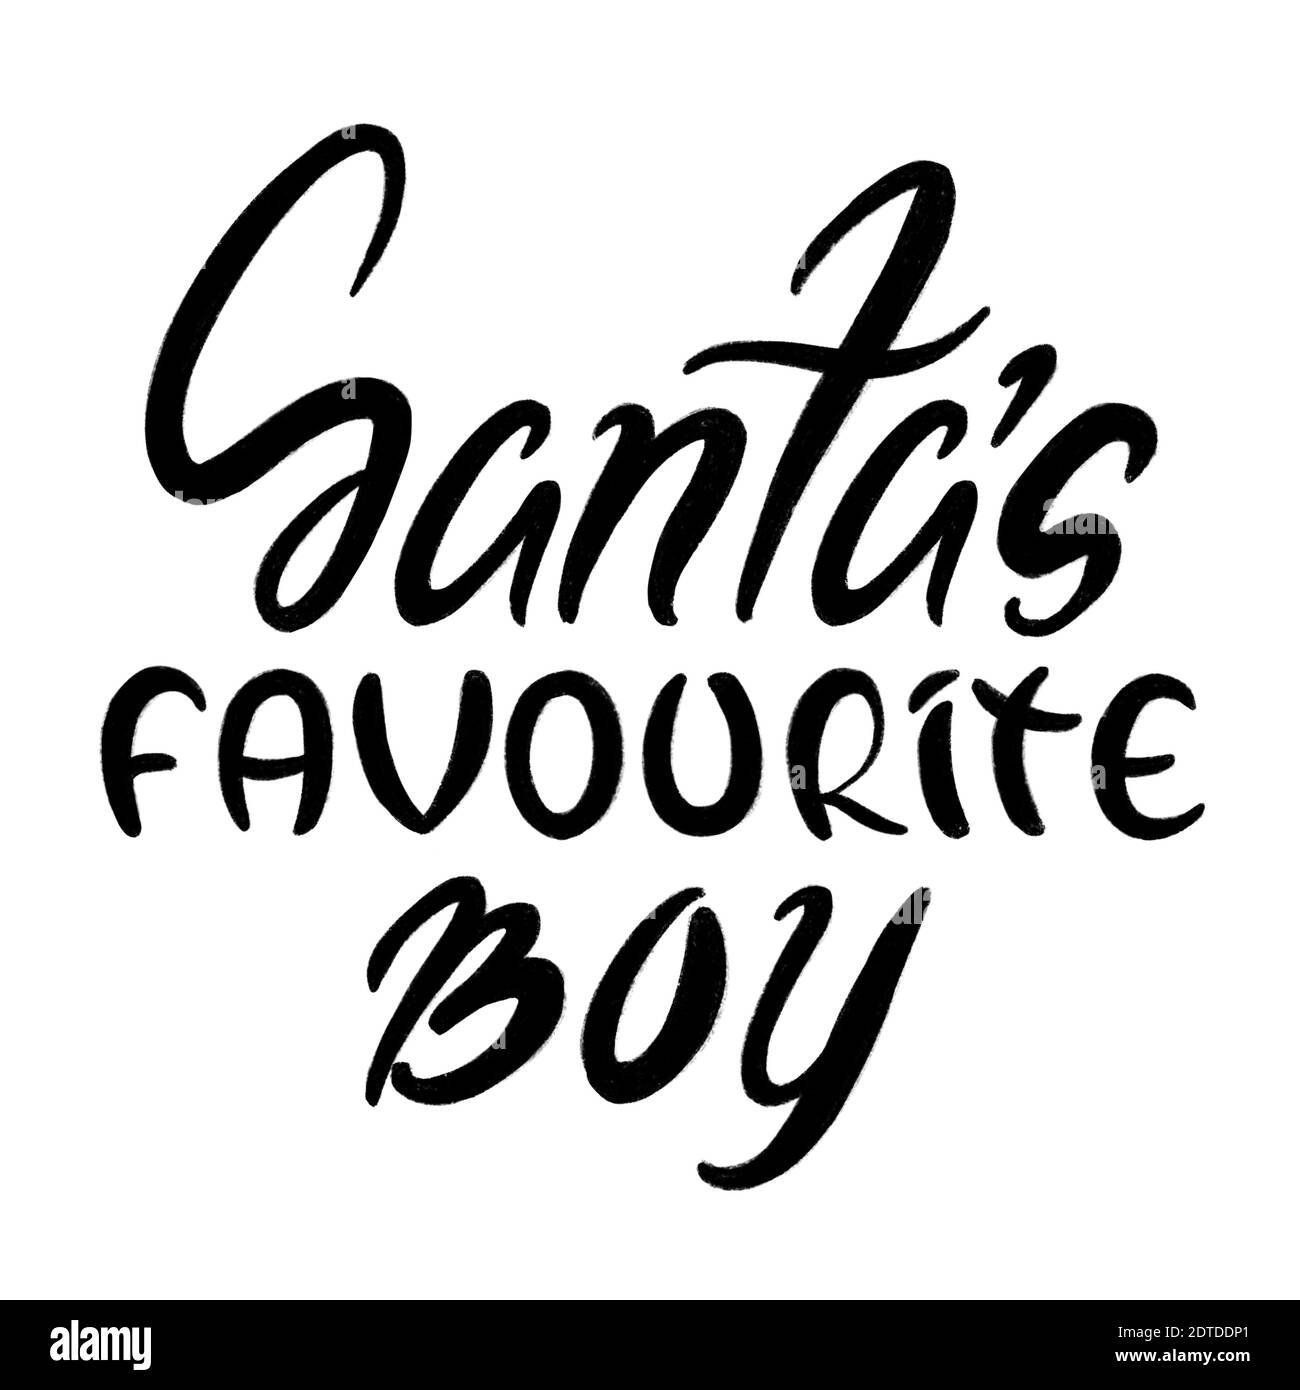 Santa's favorite BOY - funny Christmas calligraphy phrase. Good for baby and child clothes, poster, banner, mug, and gift decortaion. Stock Photo